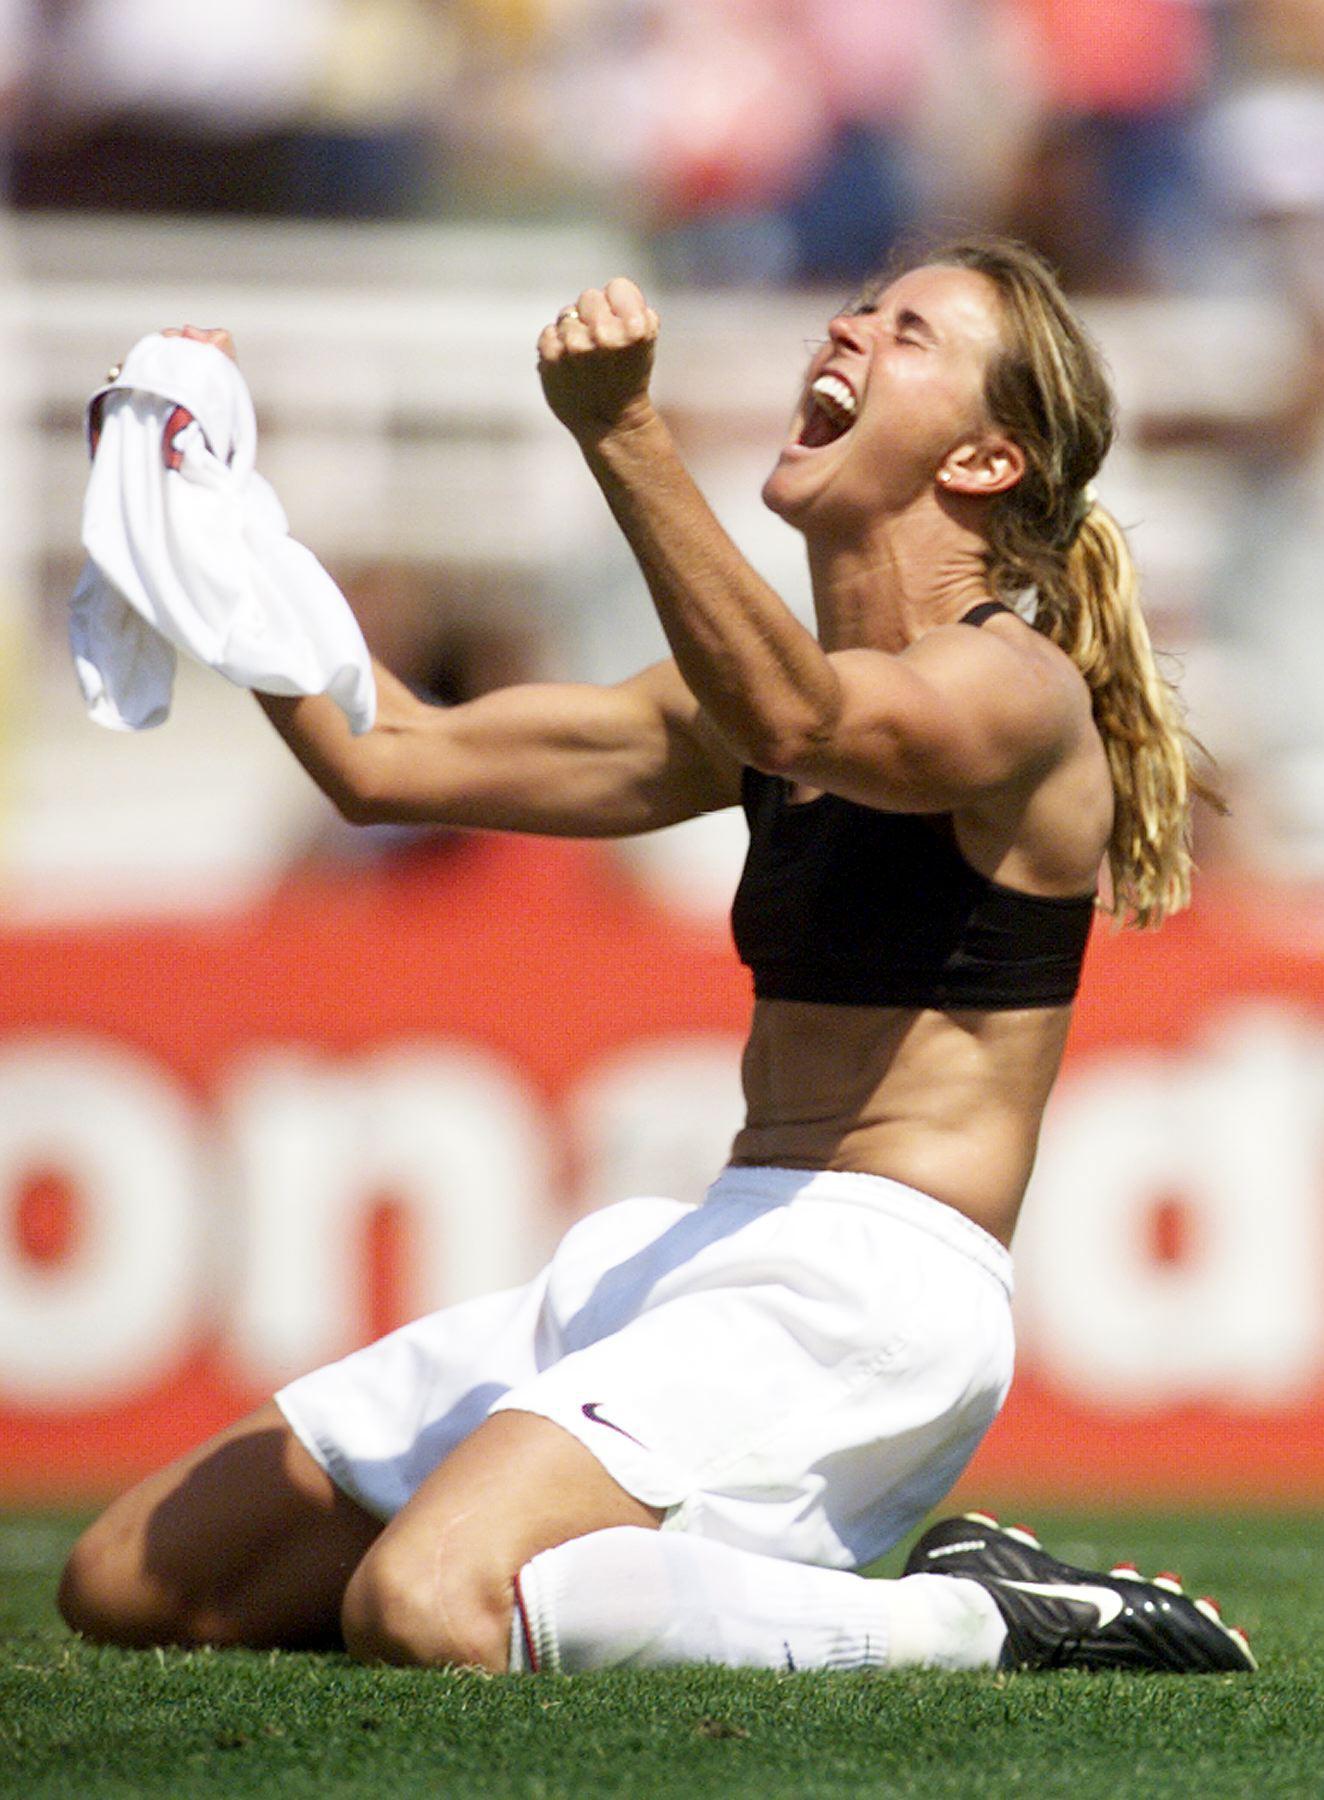 A joyful athlete on her knees on a soccer field, shouting in triumph, with a jersey in hand.